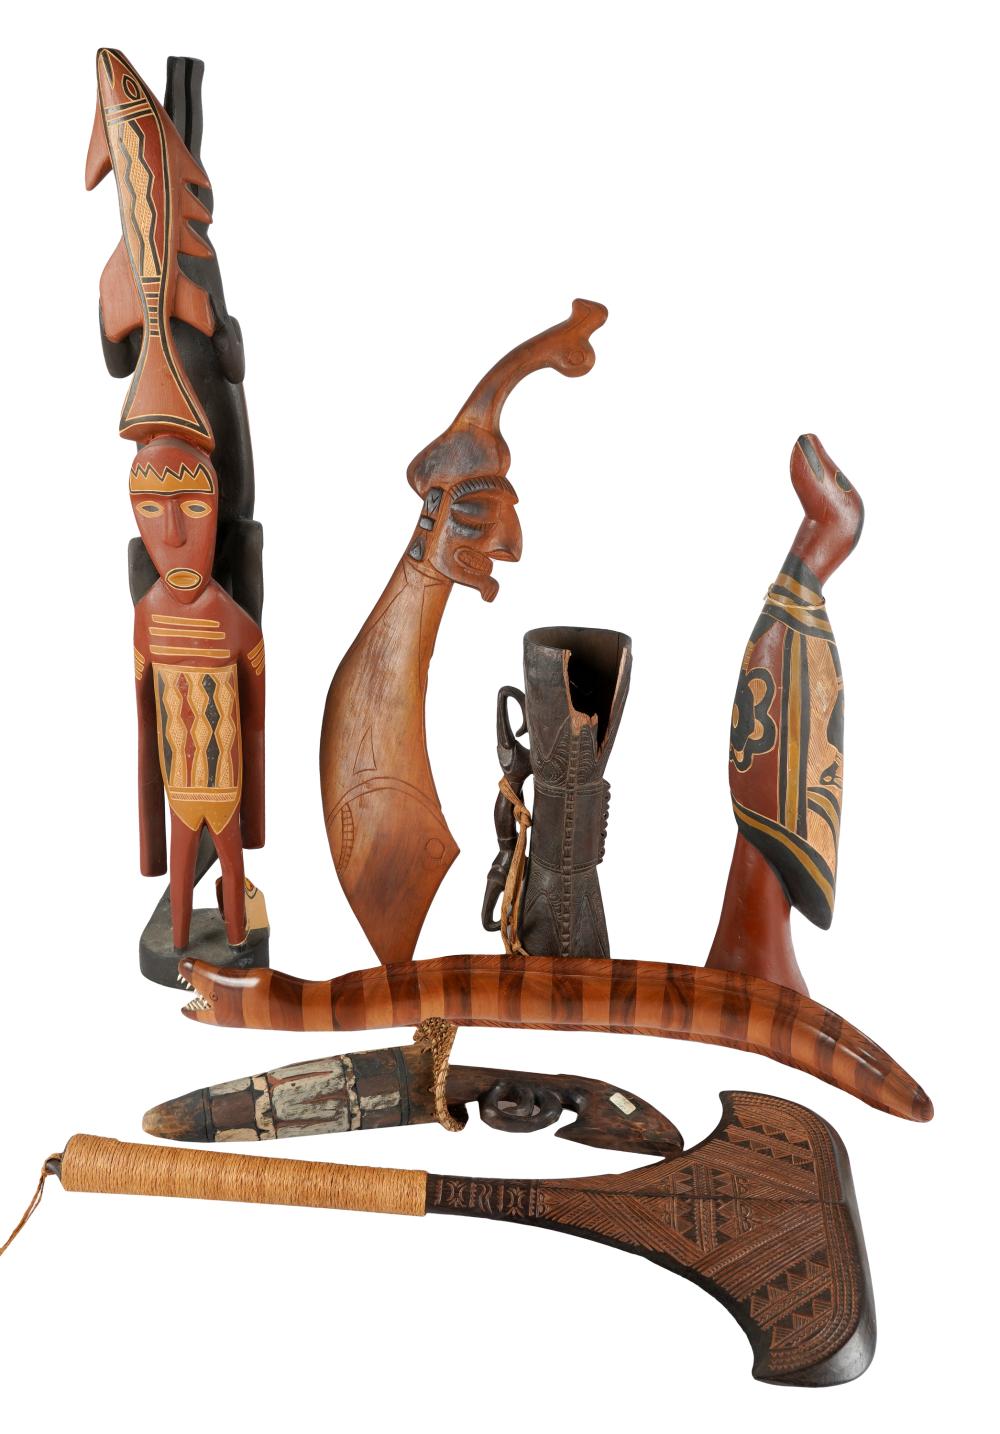 COLLECTION OF PRIMITIVE WOOD CARVINGScomprising 324573